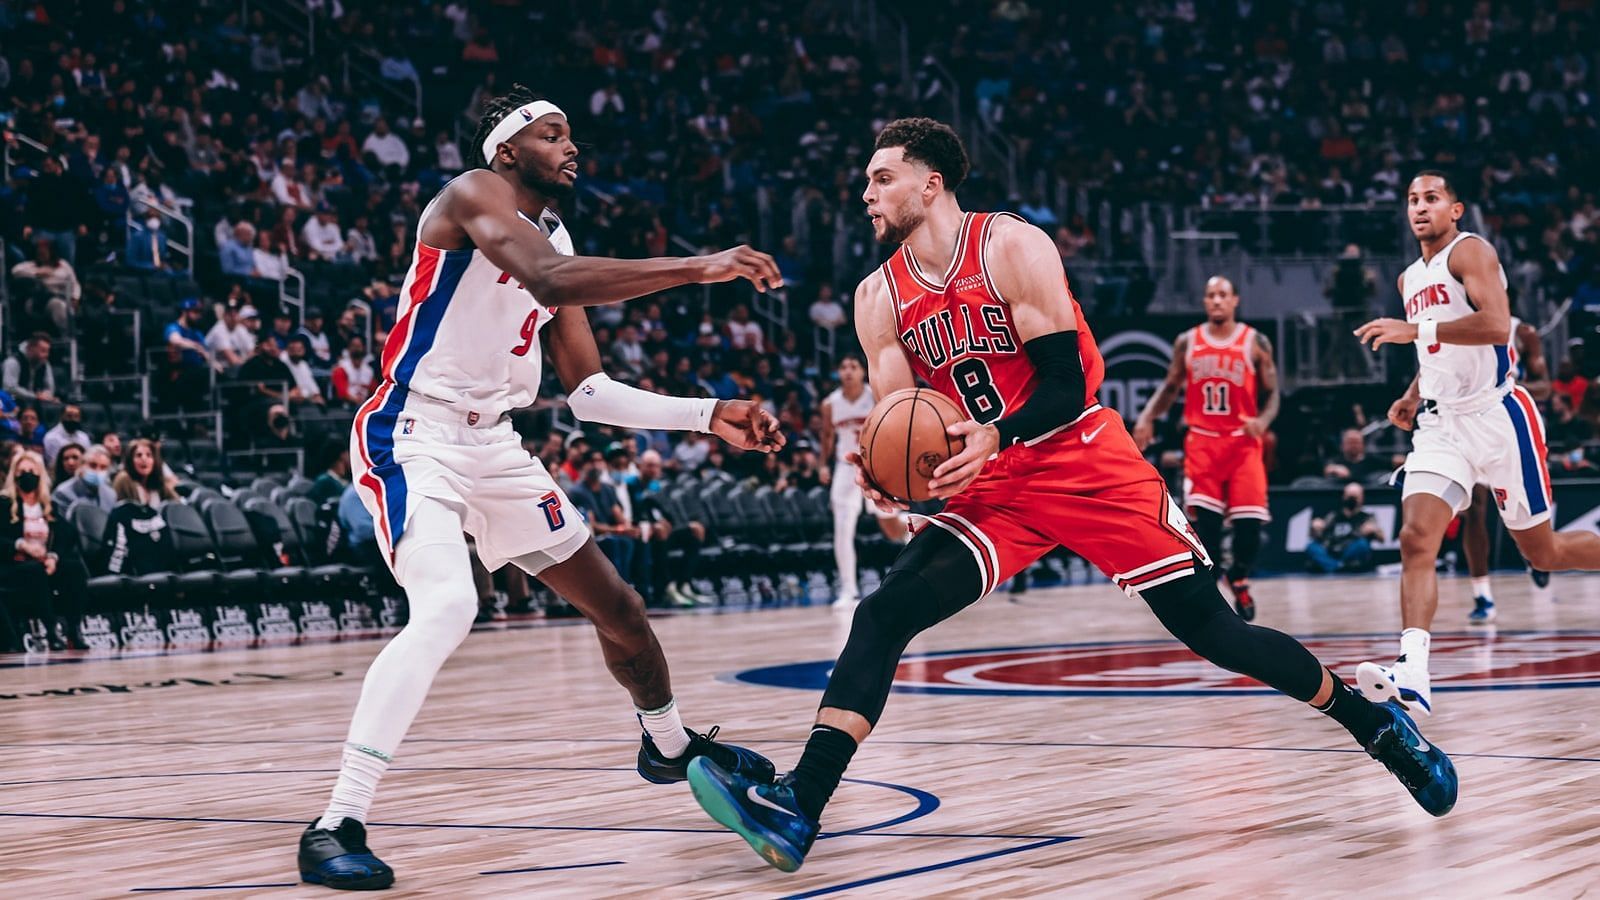 The Detroit Pistons are mired in a long losing slump against the Chicago Bulls. [Photo: NBA.com]